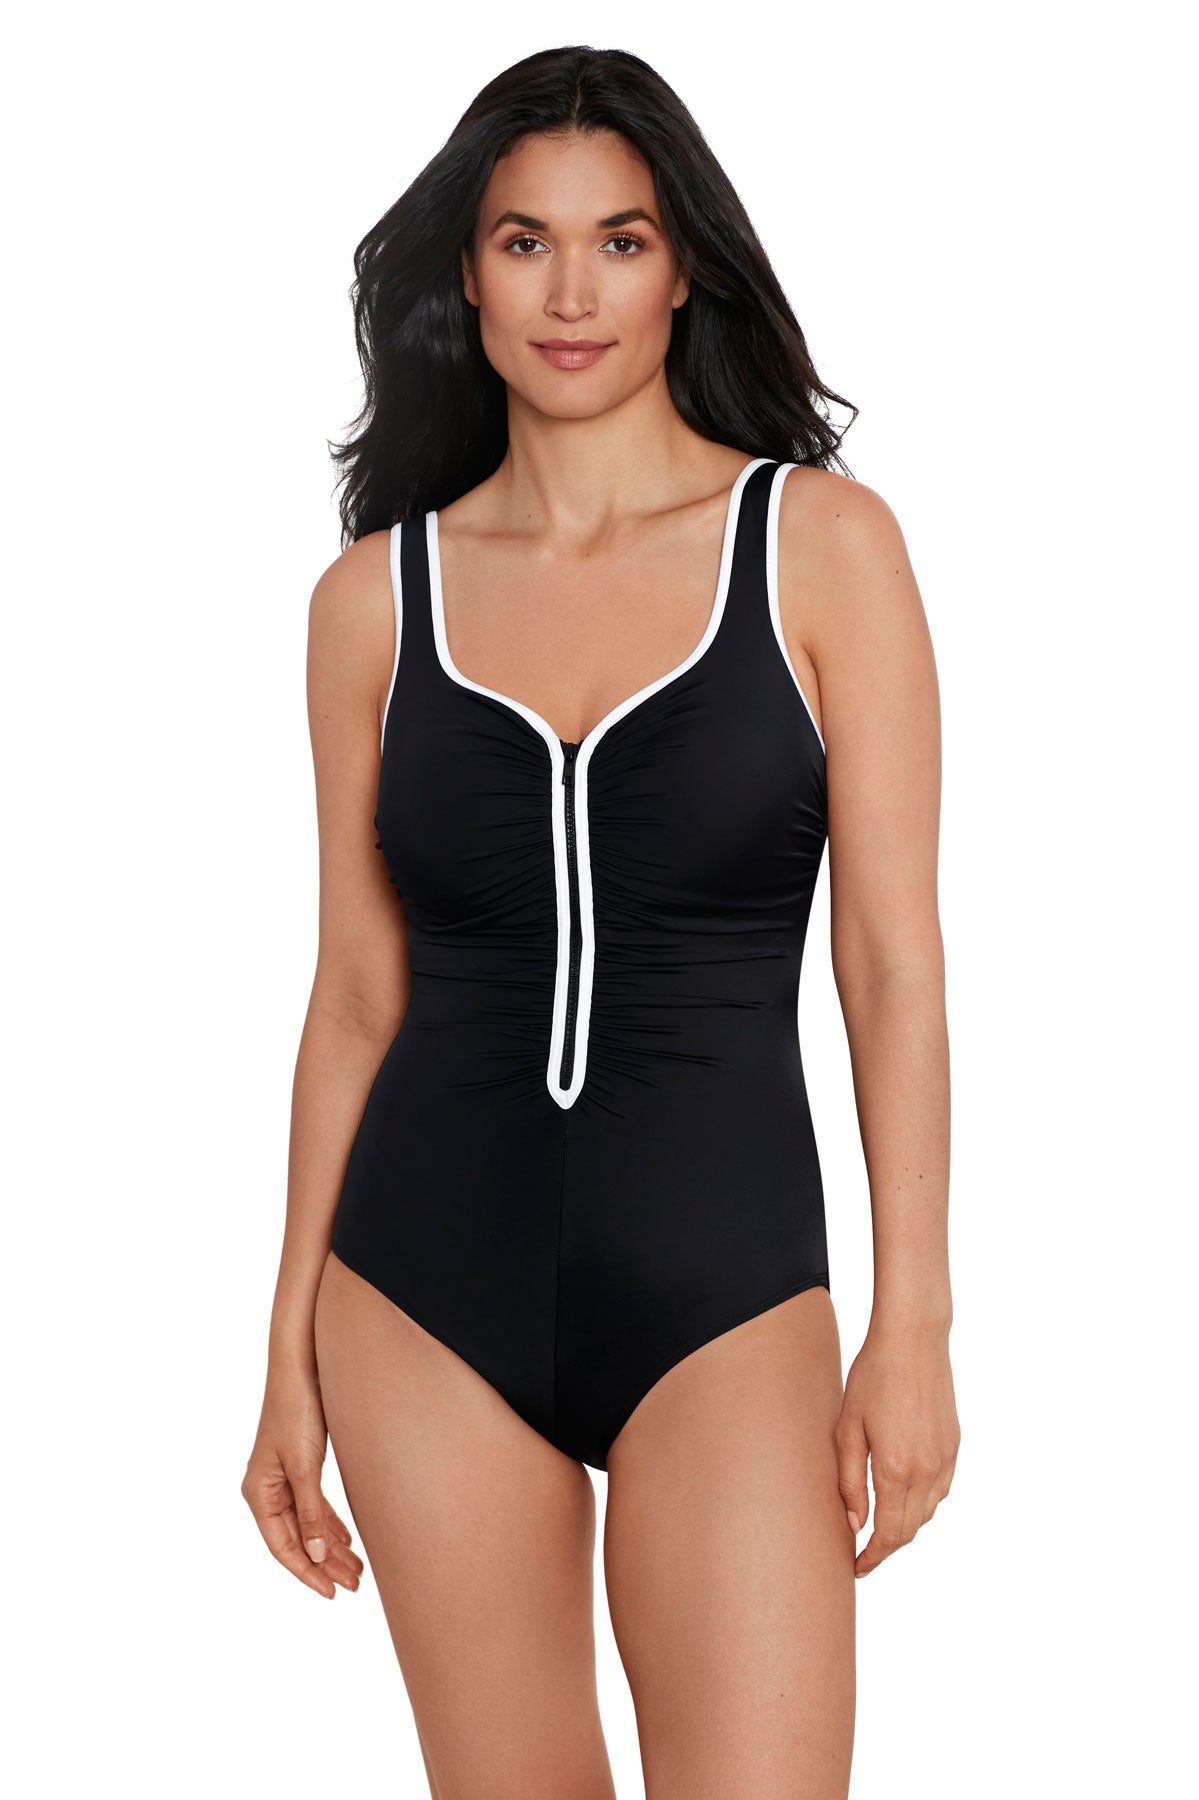 Shapesolver Sport: One Piece Color Coated Zipper Tank Swimsuit - BLACK/WHITE